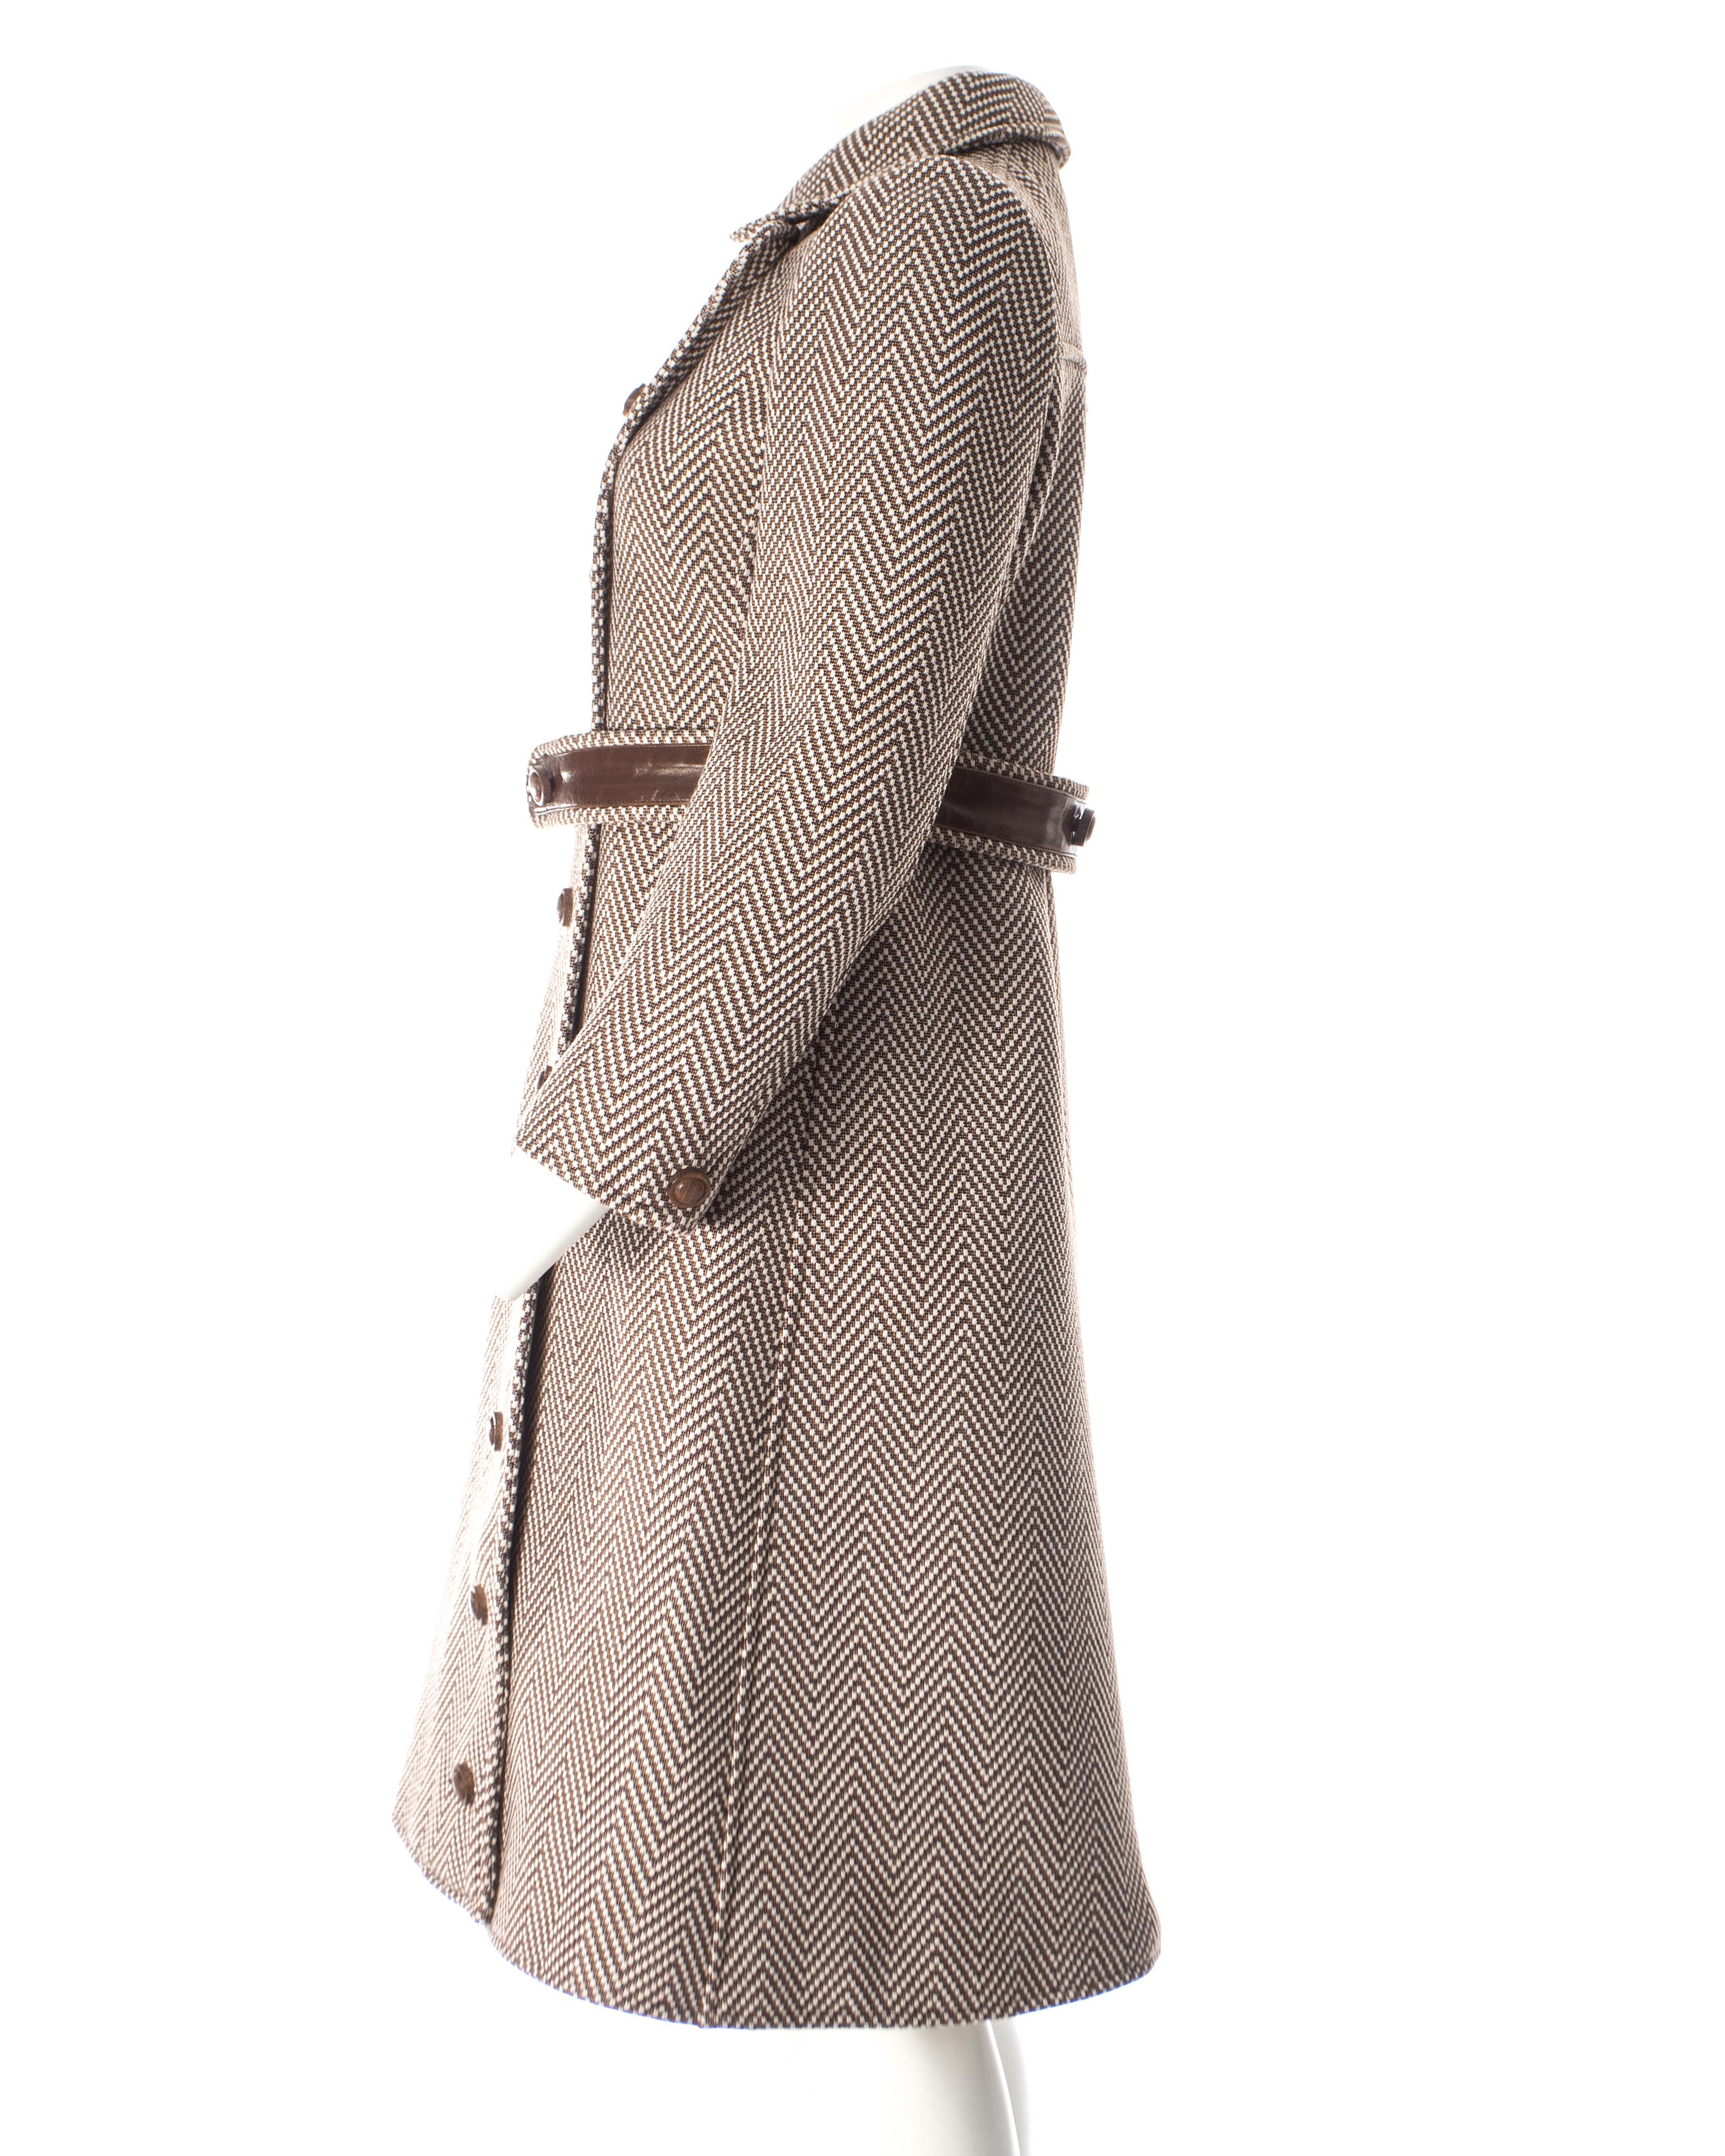 Women's or Men's Courreges Couture Brown and cream Herringbone wool and leather coat, circa 1969